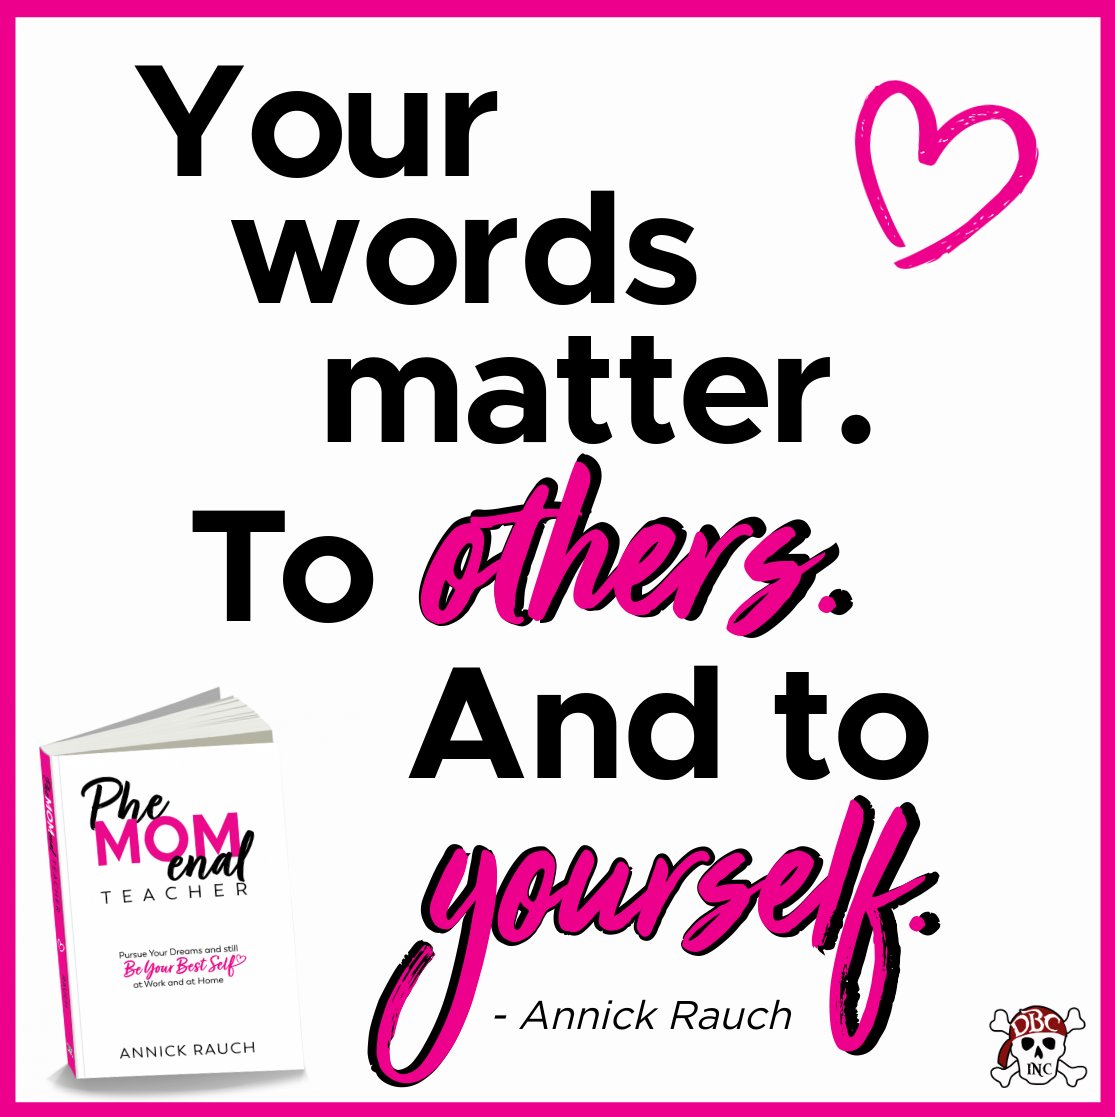 'Your words matter!' Be mindful of what you say to others--and YOURSELF. #PheMOMenal Teacher by @AnnickRauch is PURE💞! Have you grabbed your copy yet? 🇺🇸 bit.ly/PheMOMenal 🇨🇦 bit.ly/PheMOMenalCA #dbcincbooks #leadlap @burgessdave @TaraMartinEDU